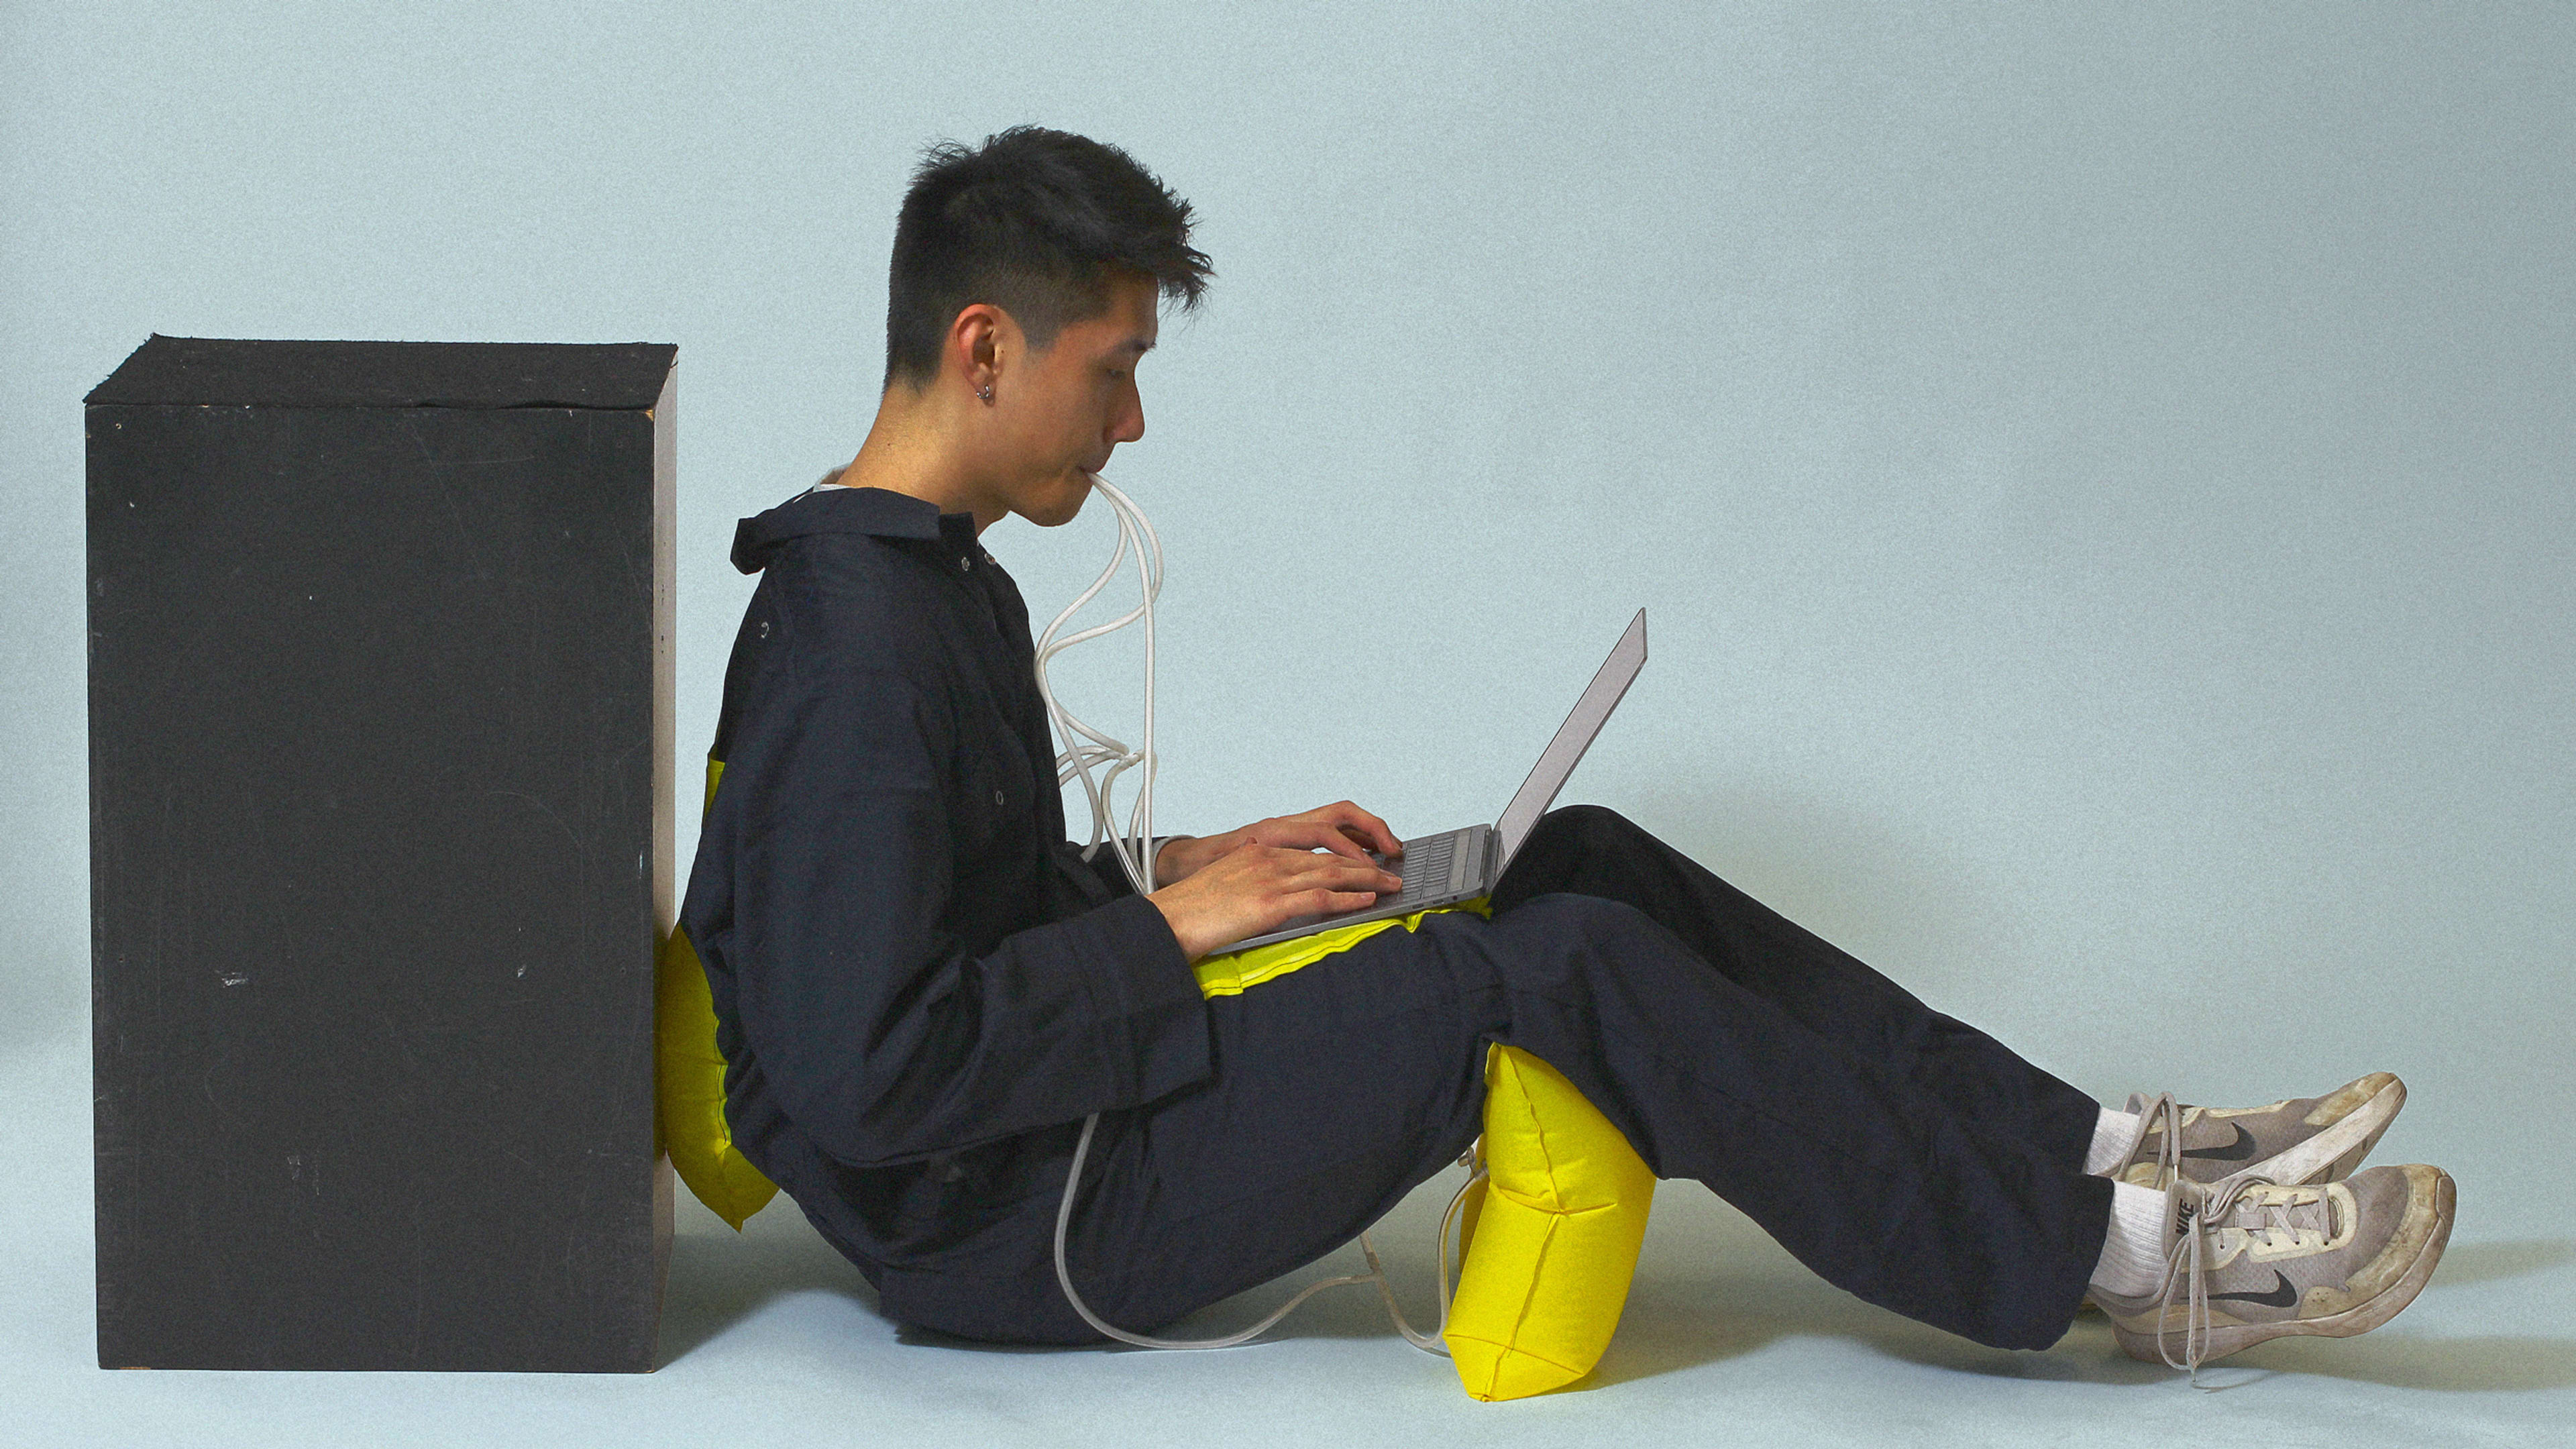 Work-from-home fashion gets a radical makeover with inflatable backrests and built-in keyboards